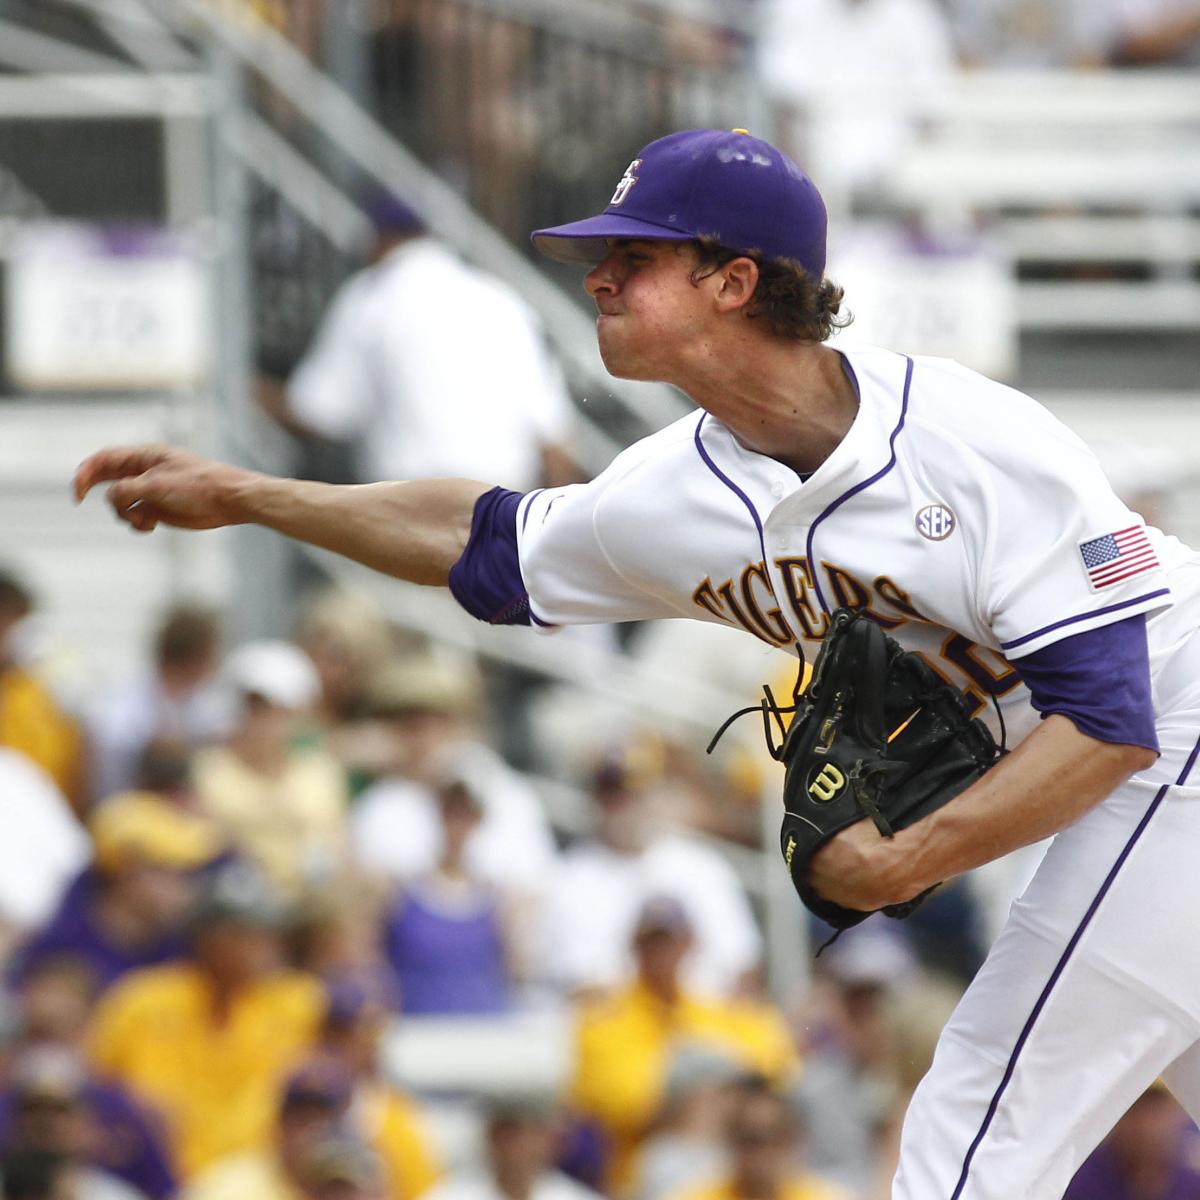 College World Series Schedule 2013: Dates, Matchups, Live Stream and TV